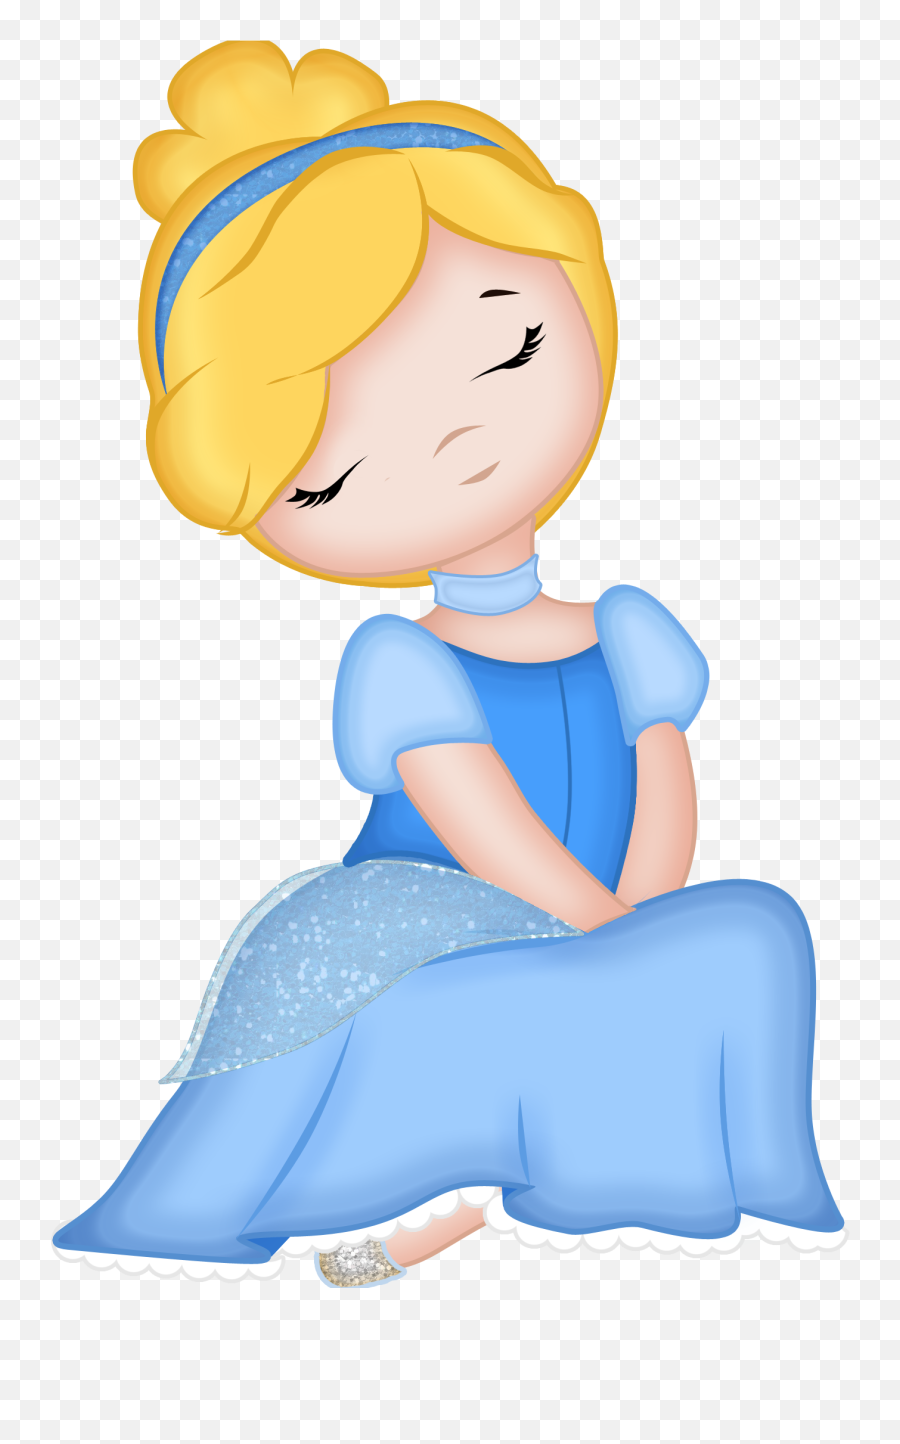 The Princess And The Frog Clip Art Images Disney Clip Art - Clip Art Cinderella Emoji,Princess And The Frog Emojis